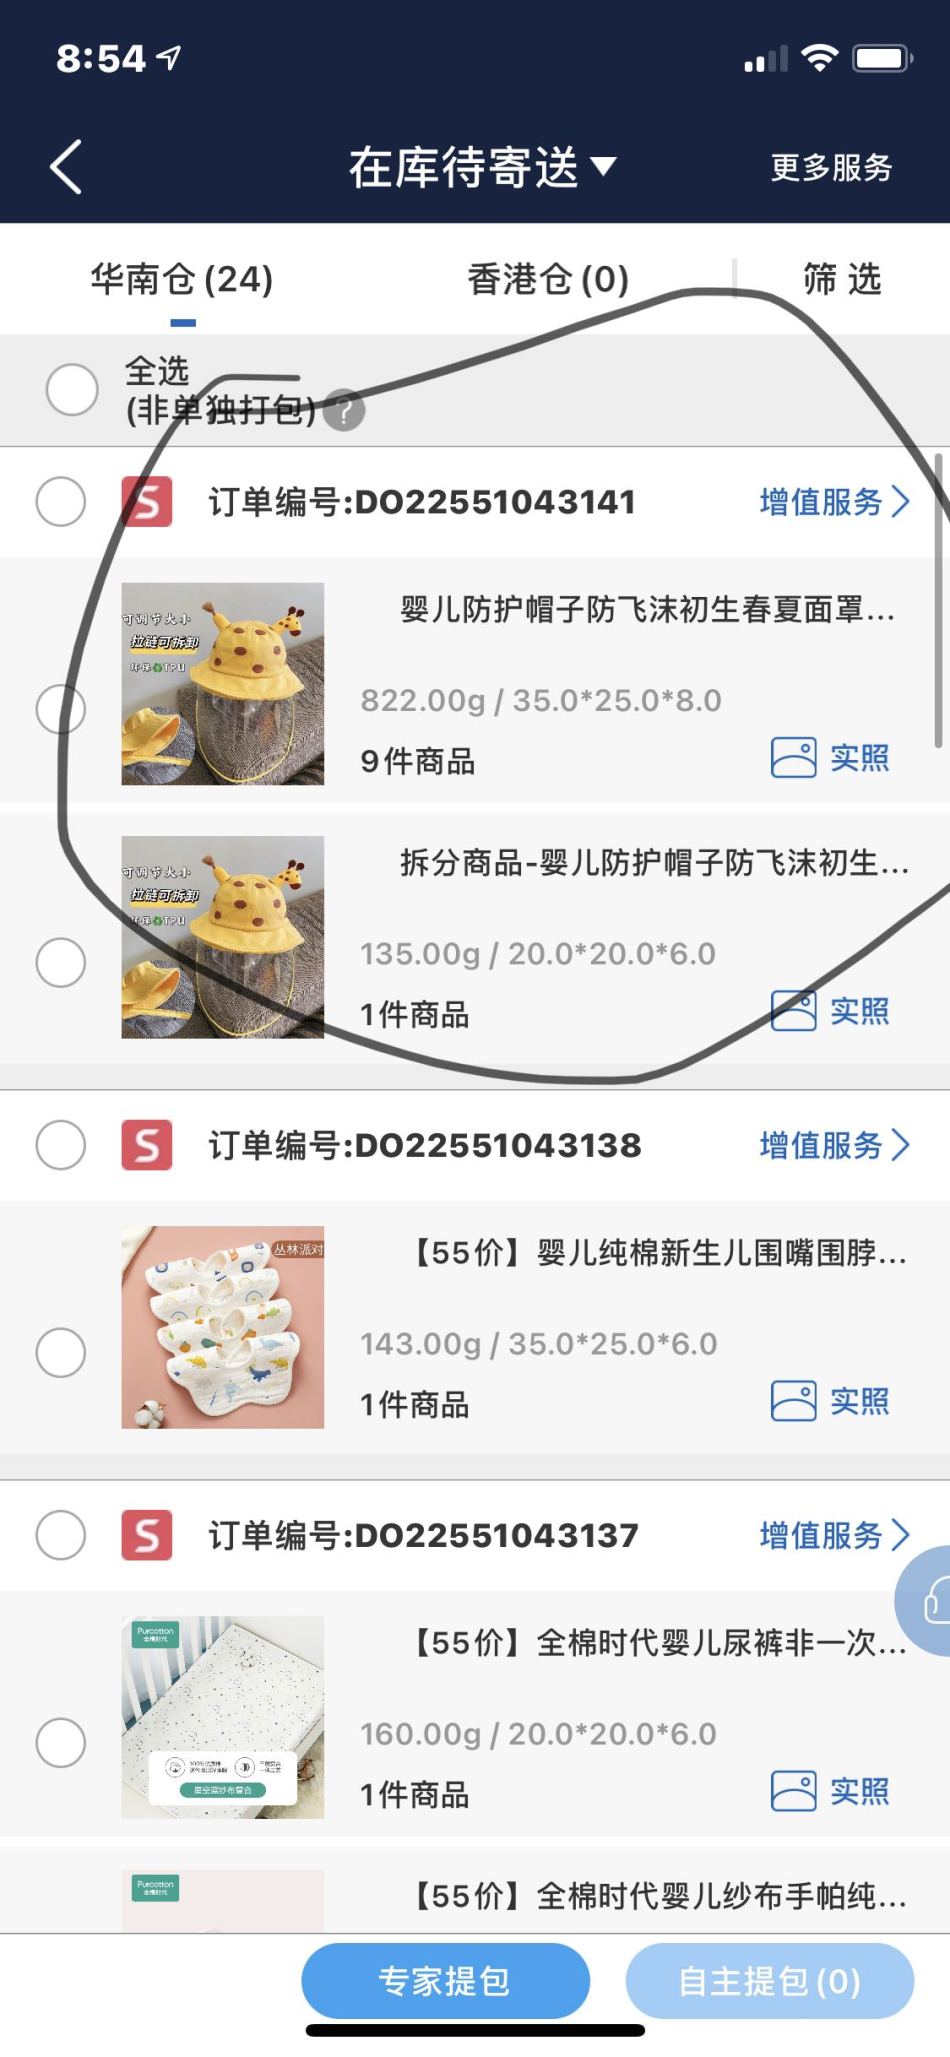 https://img1.superbuy.com/images/consult/2022/07/17/625f07110c38be641292175321eb6f84.jpg?x-oss-process=image/resize,w_950